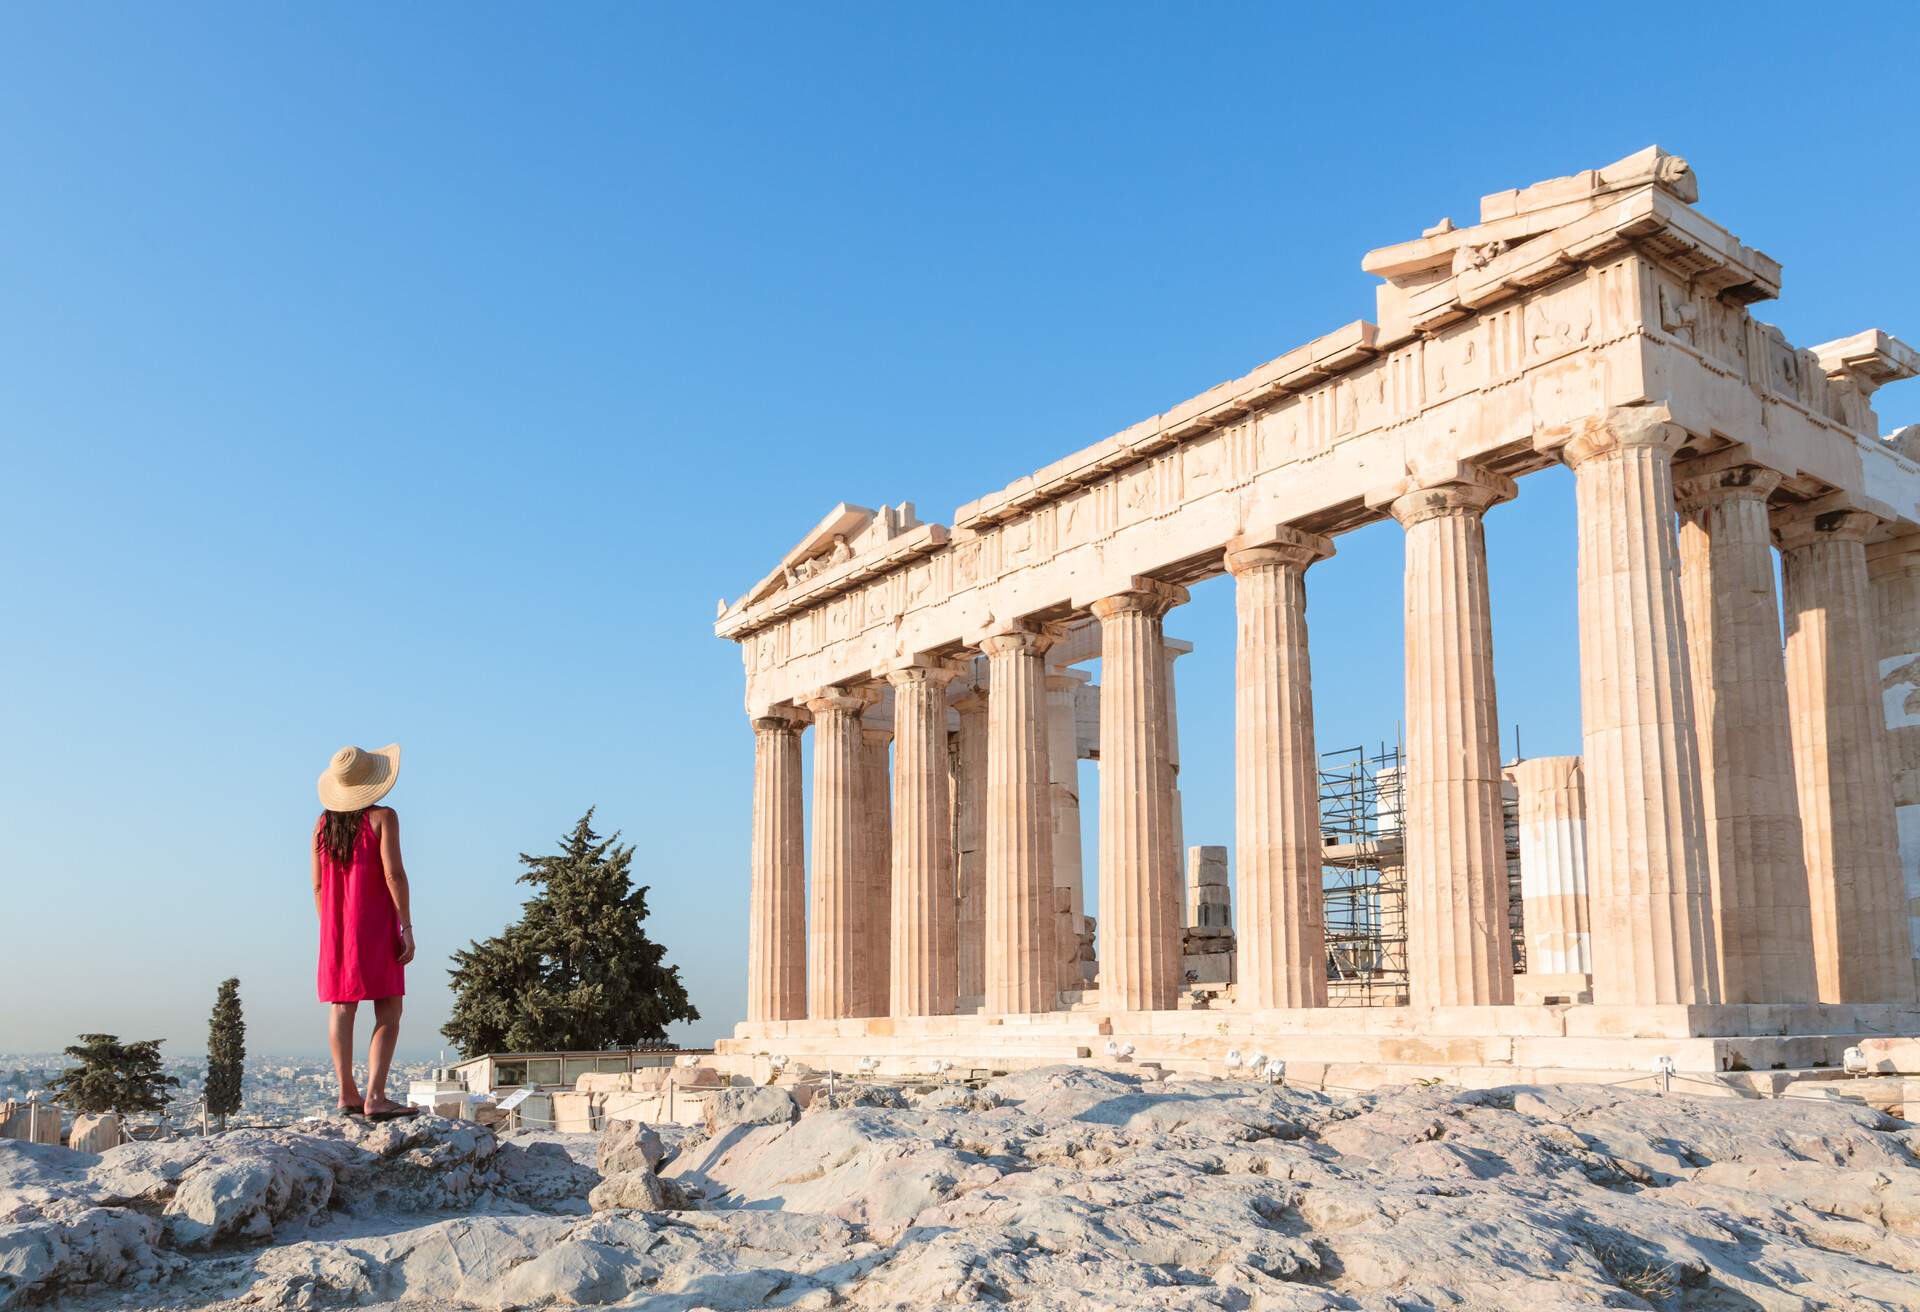 Woman looking at the famous Parthenon temple on the Acropolis, Athens, Greece